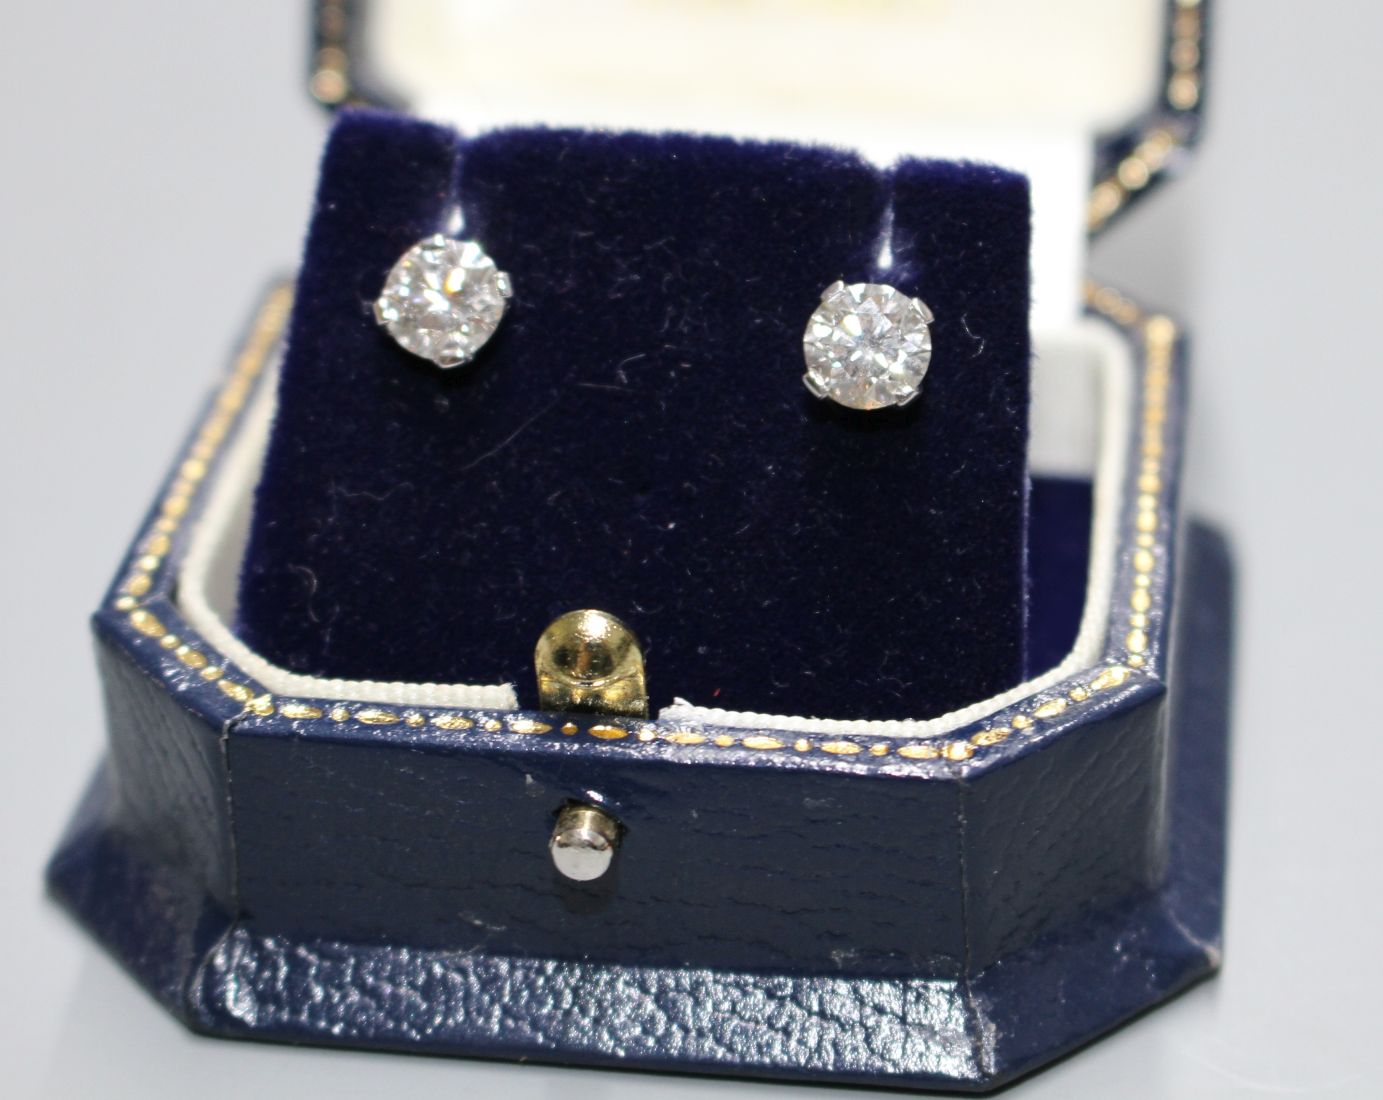 A pair of 18ct white gold and solitaire diamond ear studs, with an approximate total carat weight of